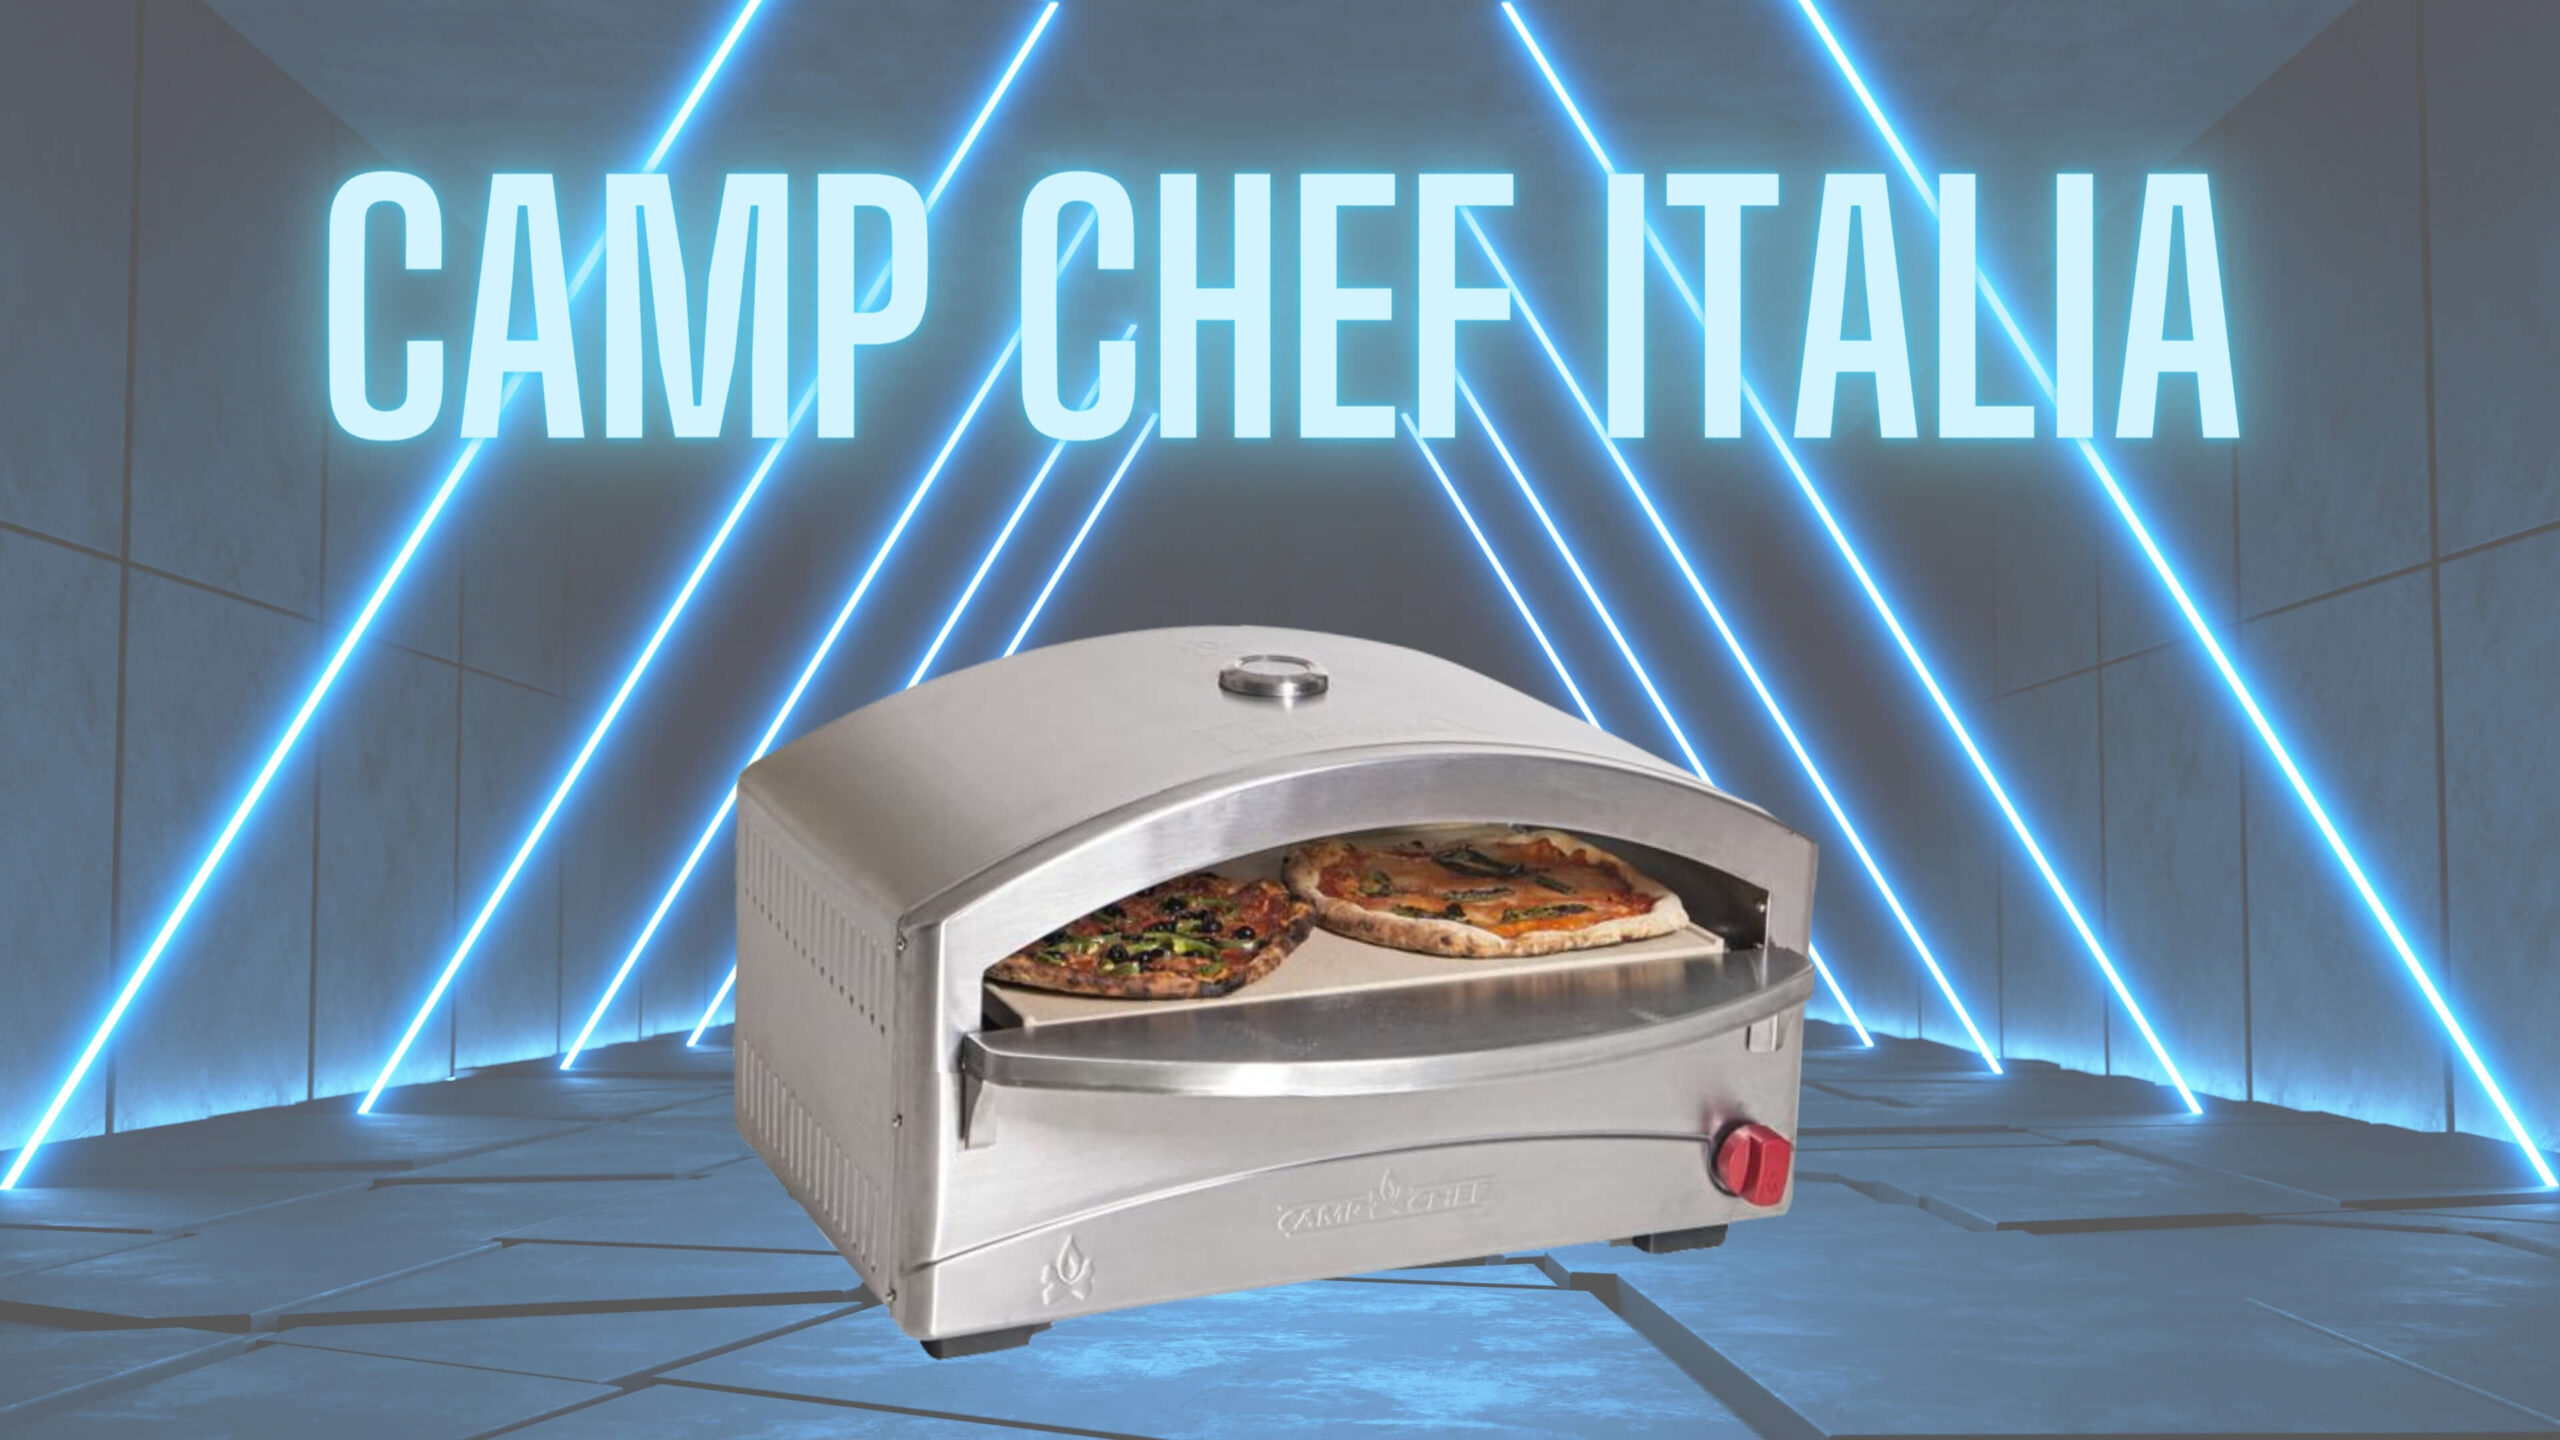 camp chef italia artisan pizza oven with customized background